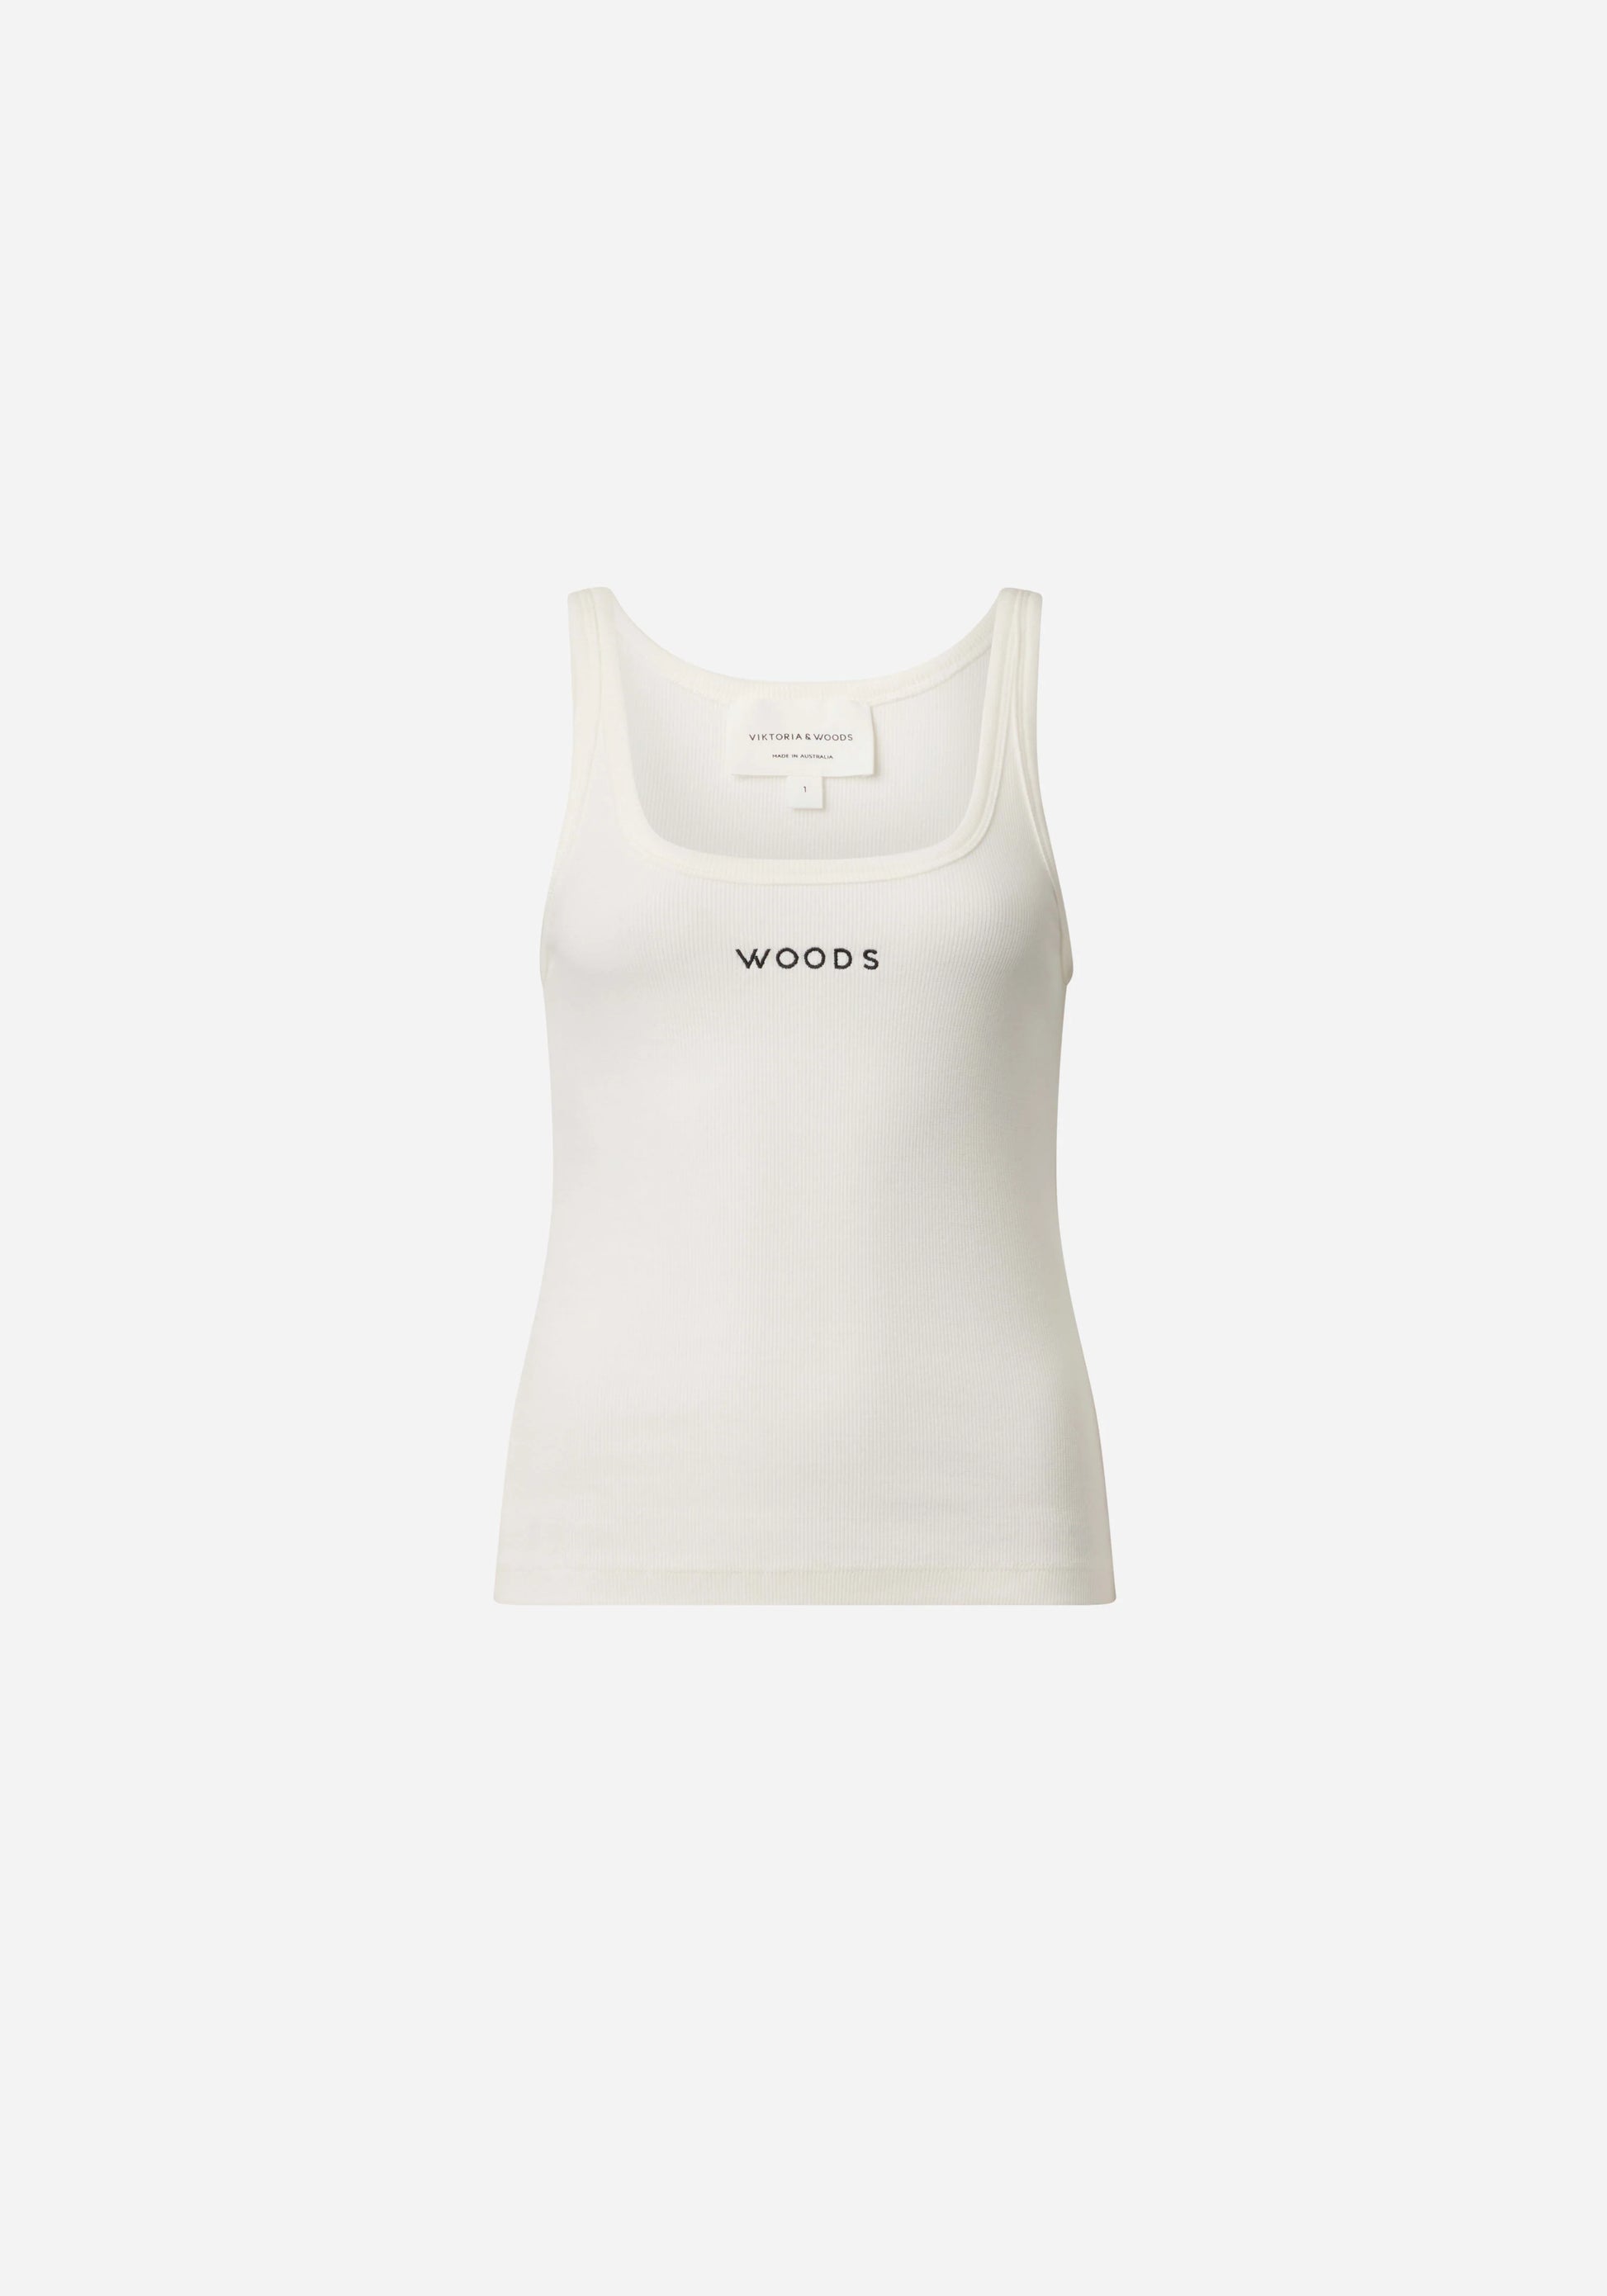 Woods Tank in White